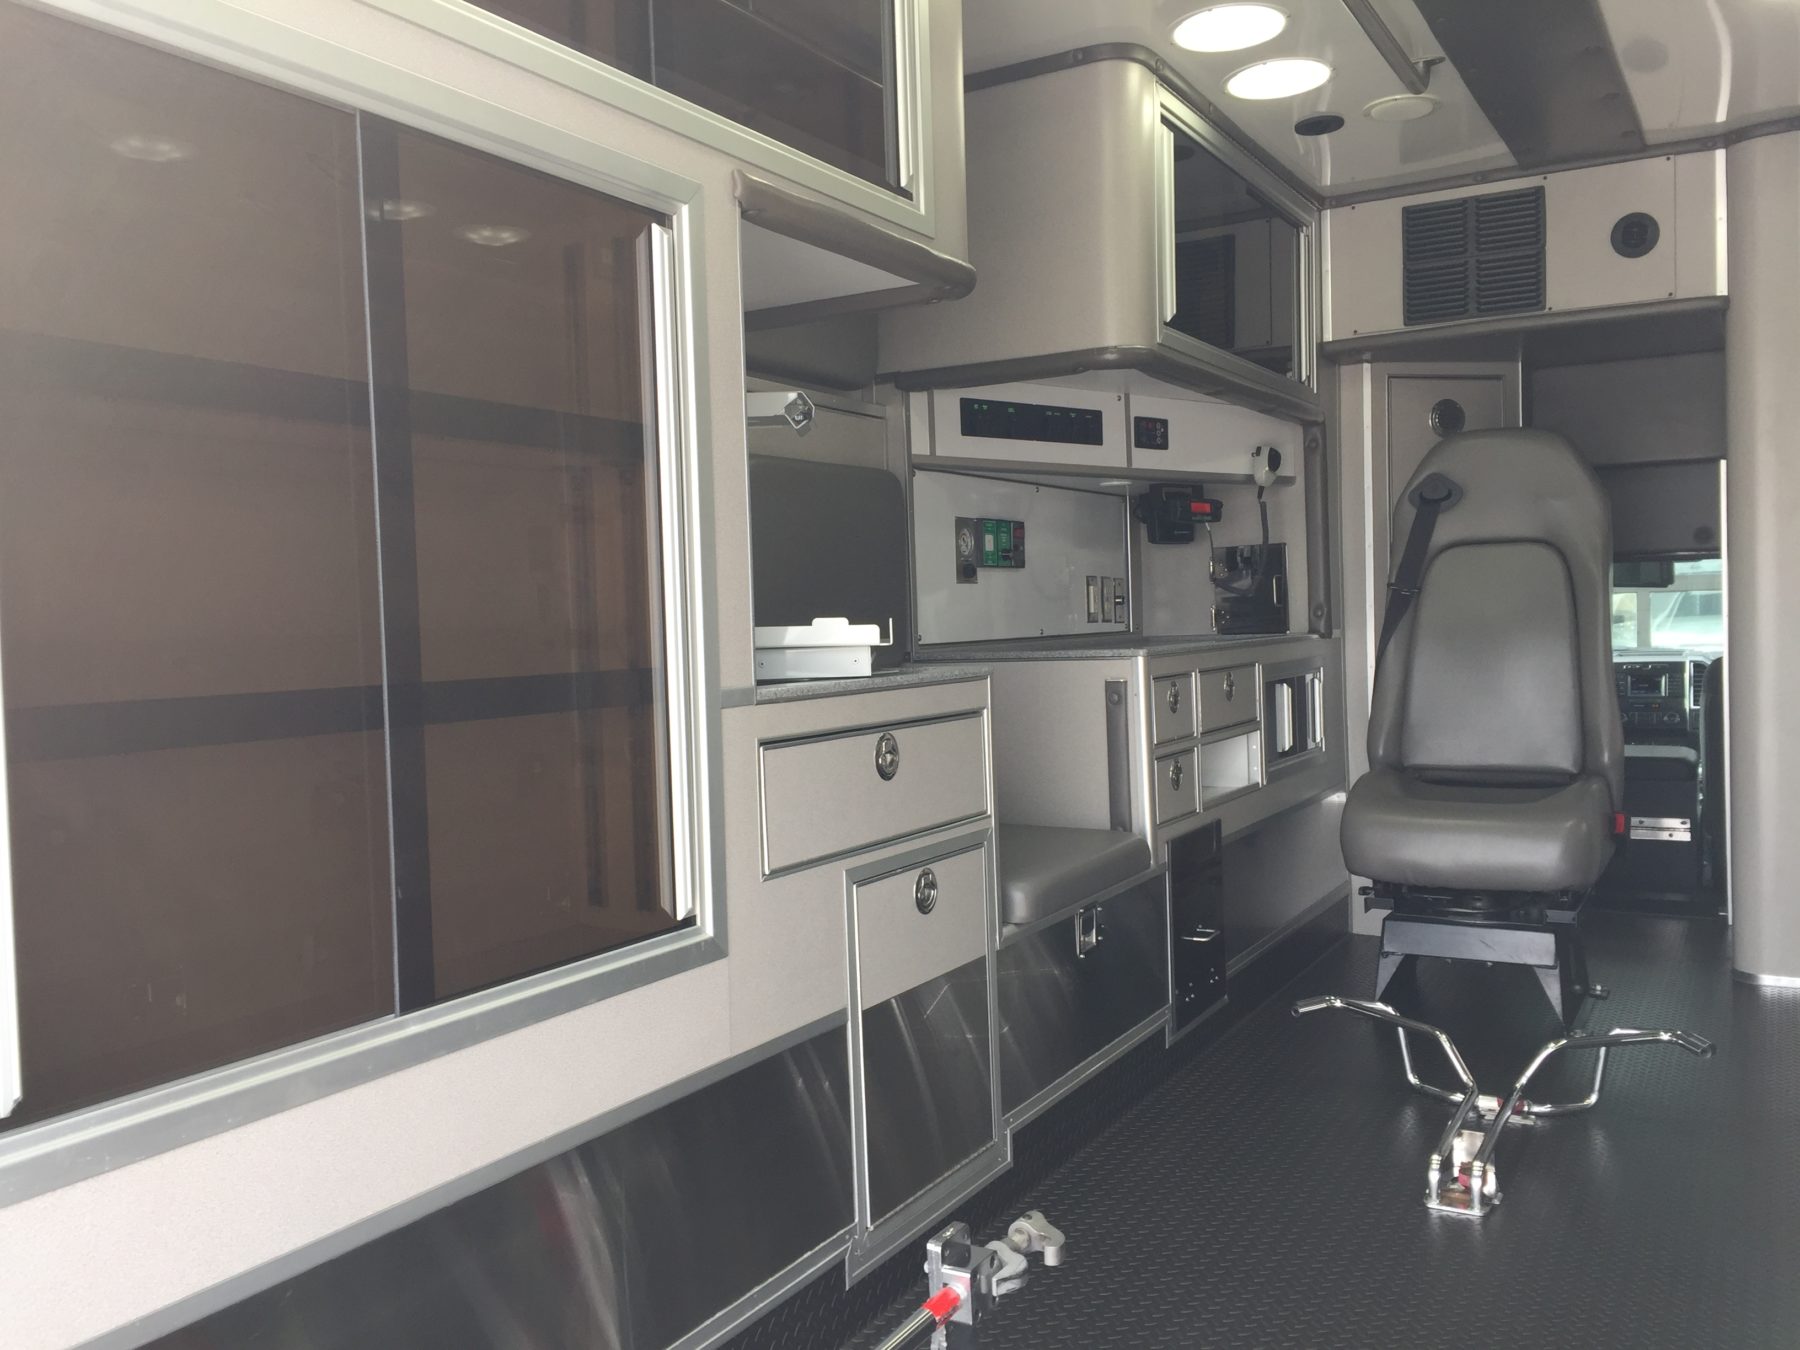 2018 Ford F450 4x4 Heavy Duty Ambulance For Sale – Picture 12